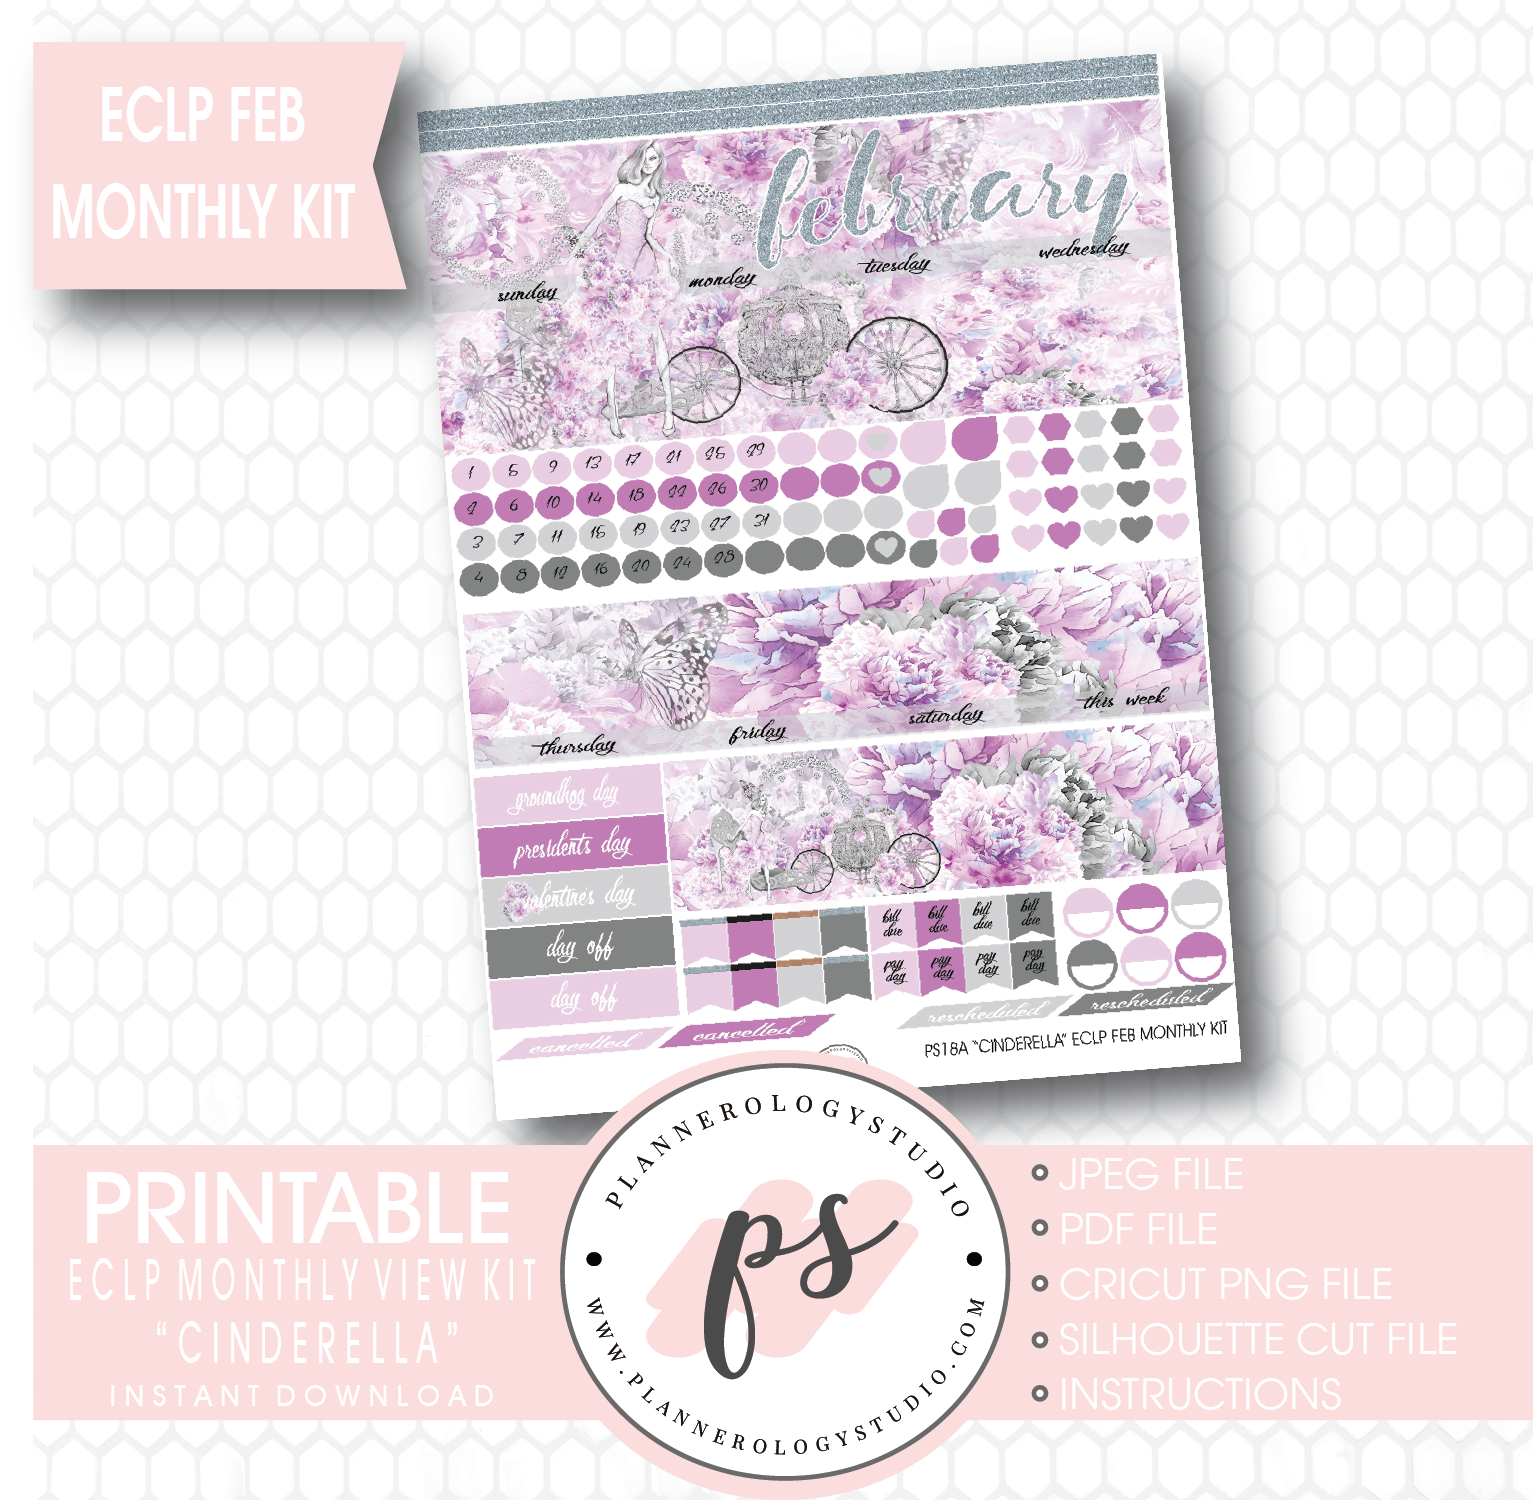 "Cinderella" February 2017 Monthly View Kit Printable Planner Stickers (for use with ECLP) - Plannerologystudio